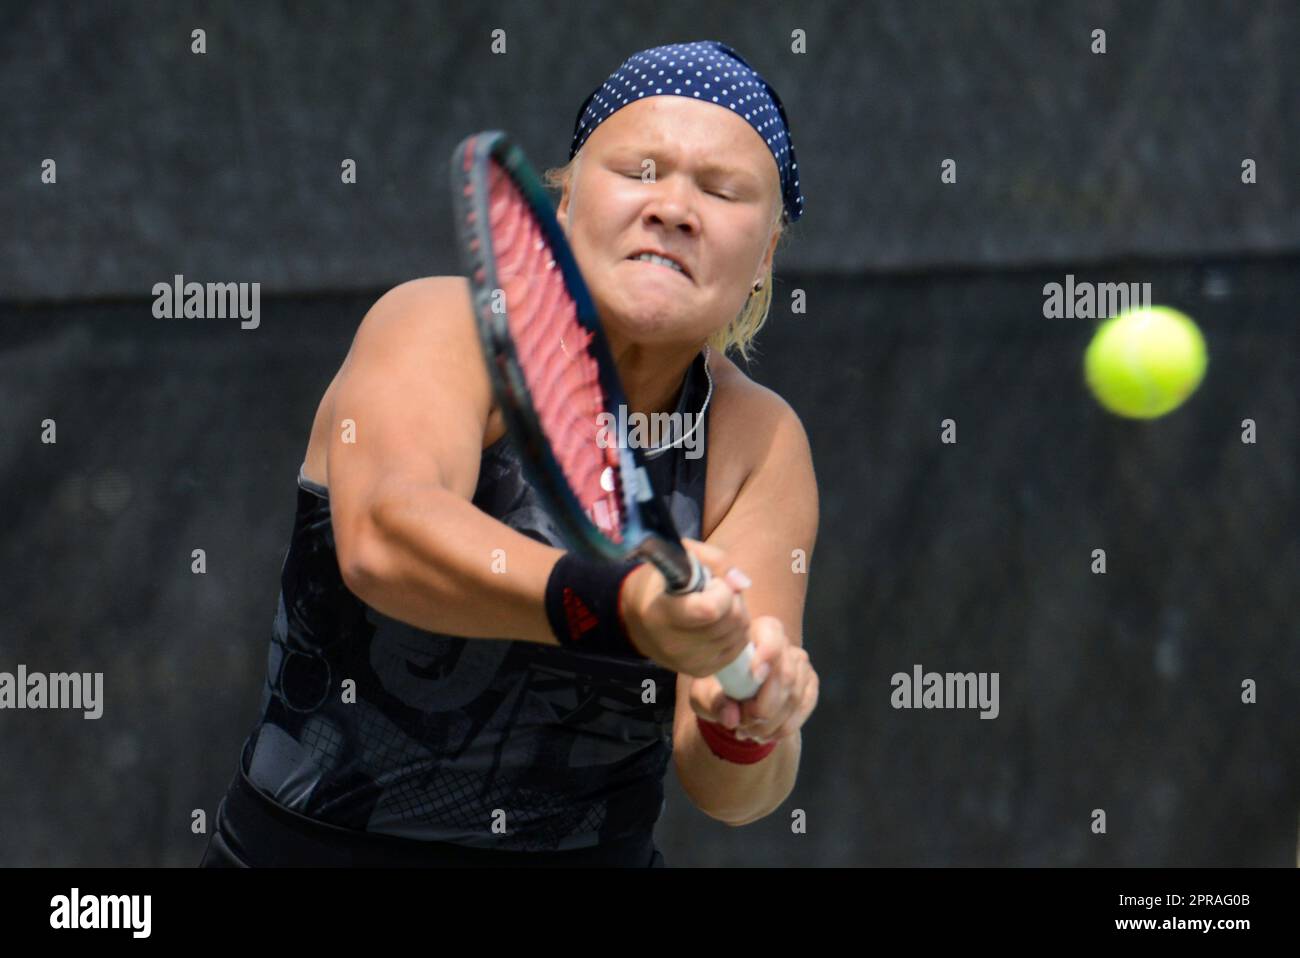 April 26, 2023, Charlottesville, Virginia, United States Diana Shnaider of Russia in her first round match at the Boars Head Womens Open ITF tennis tournament in Charlottesville Virginia (Cal Sport Media via